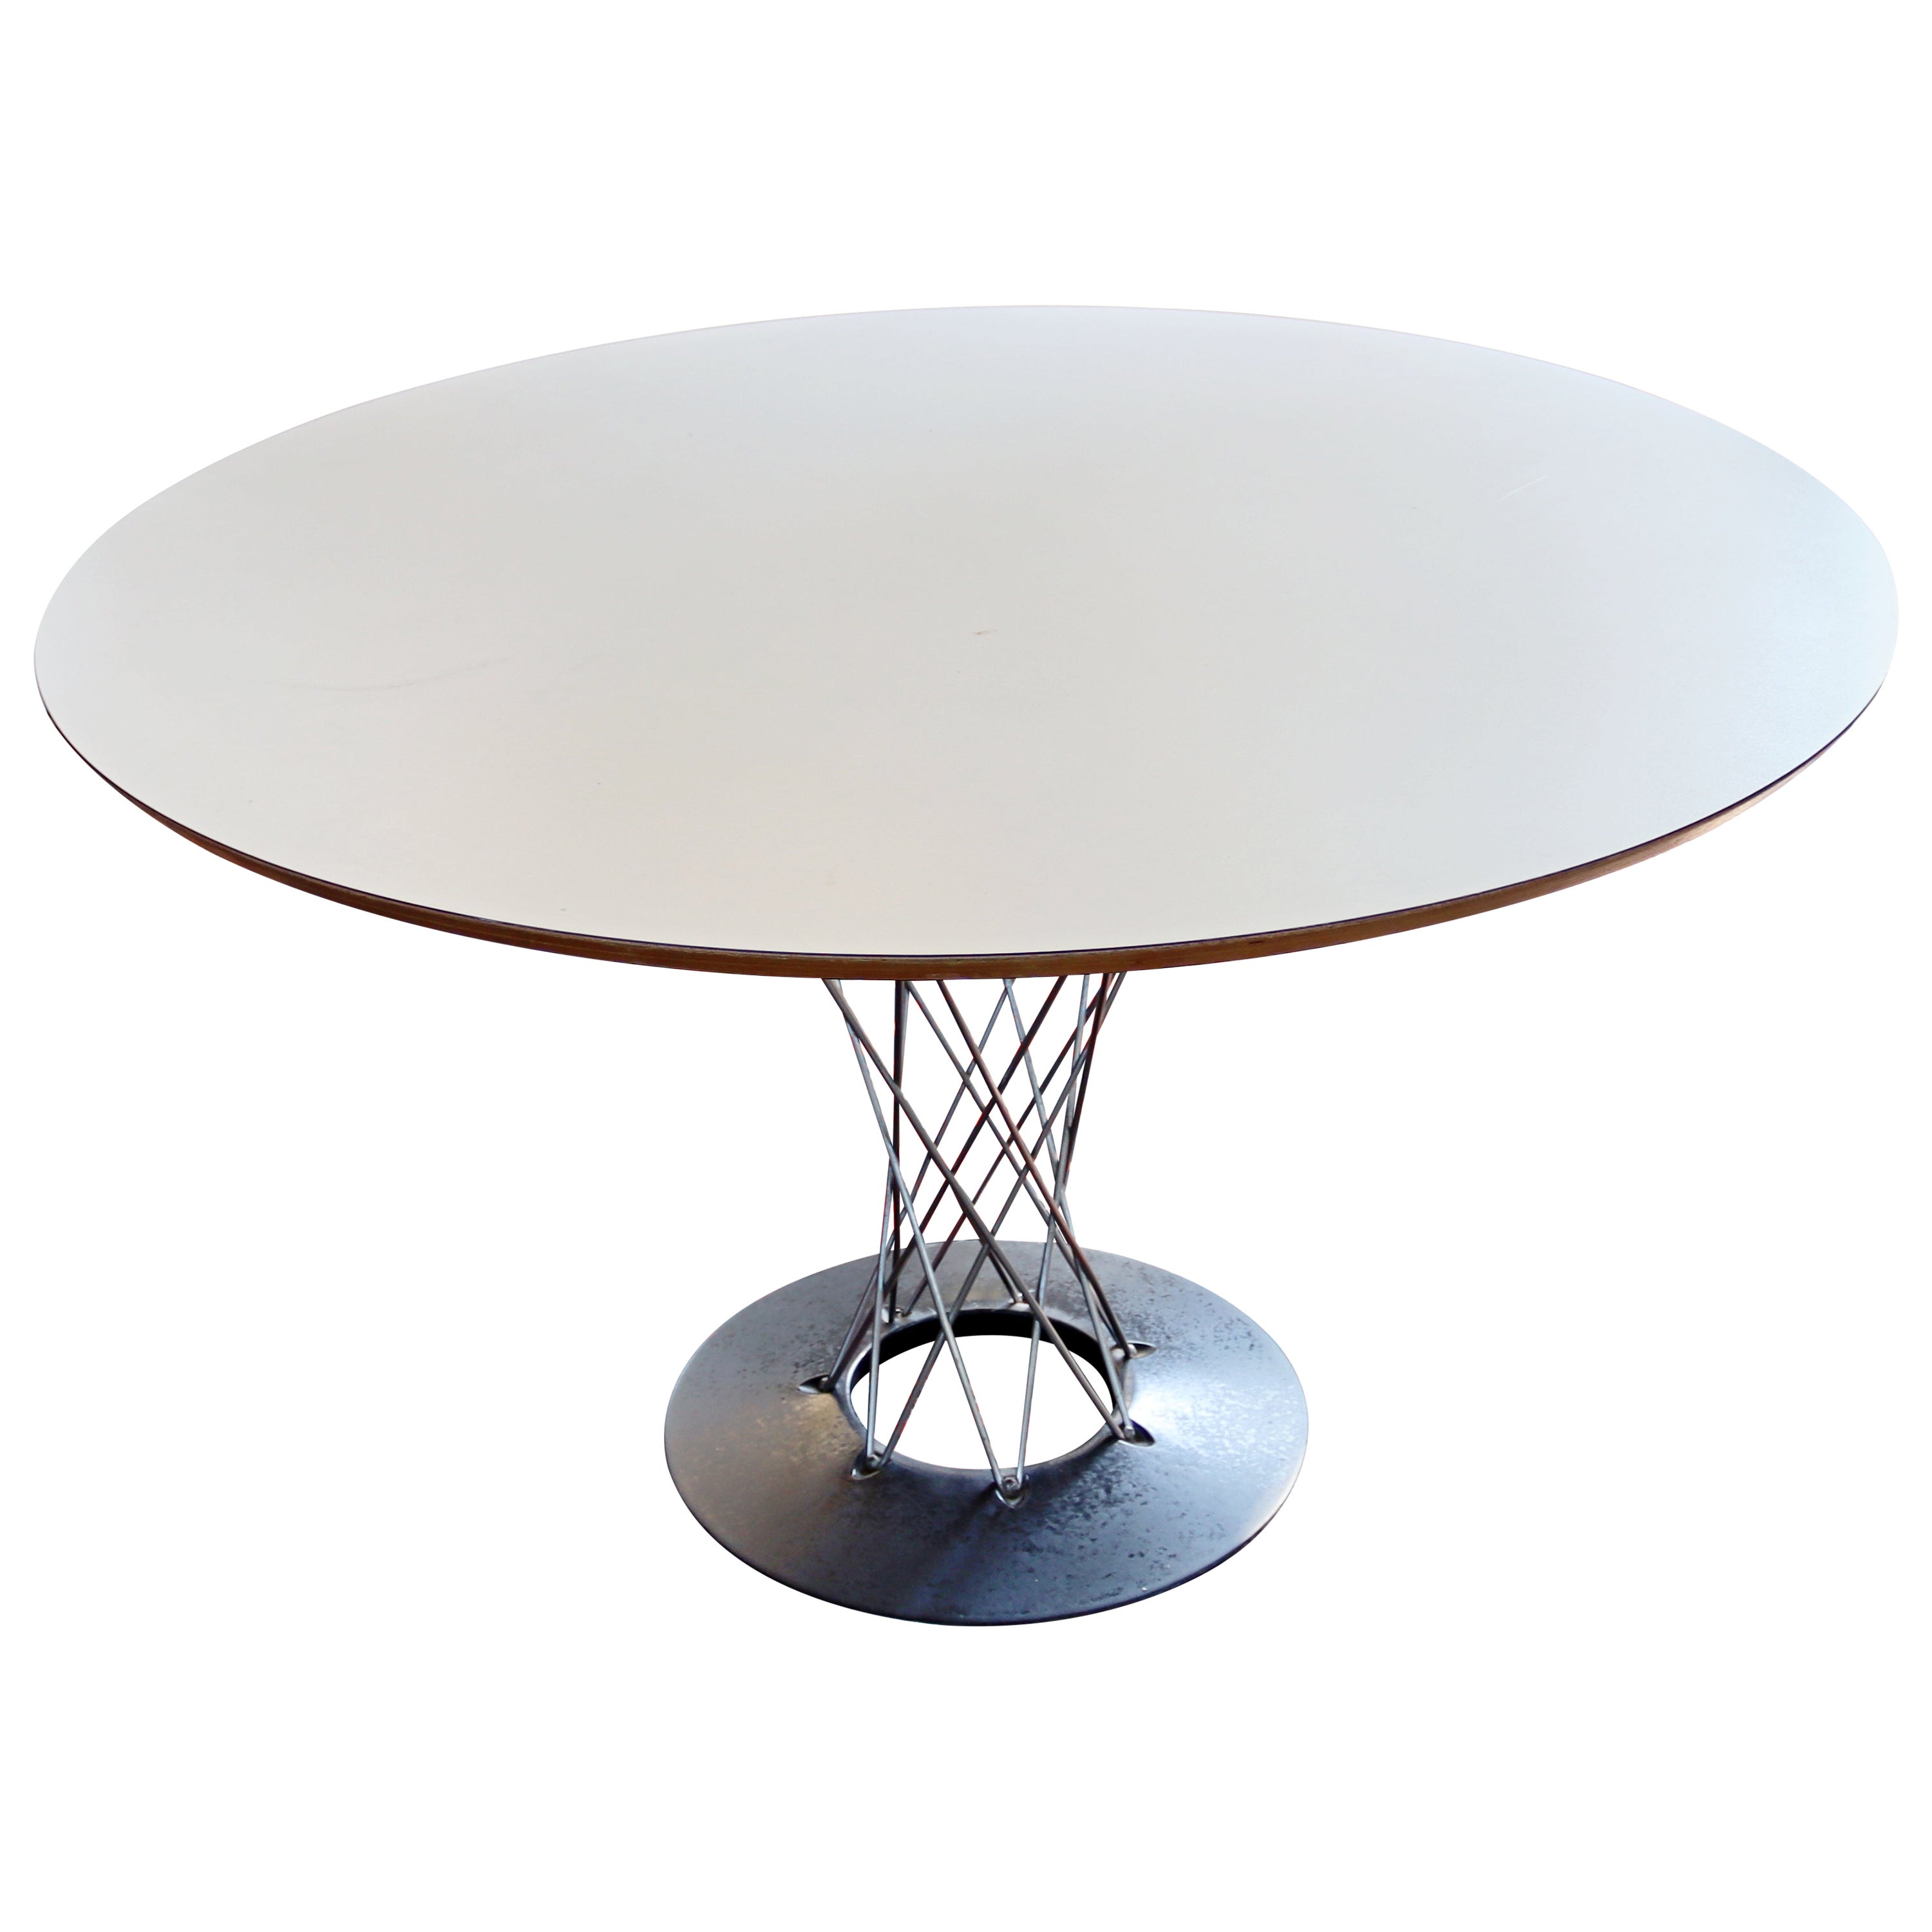 Mid-Century Modern Noguchi Knoll Cyclone Hurricane Dining Dinette Table, 1950s